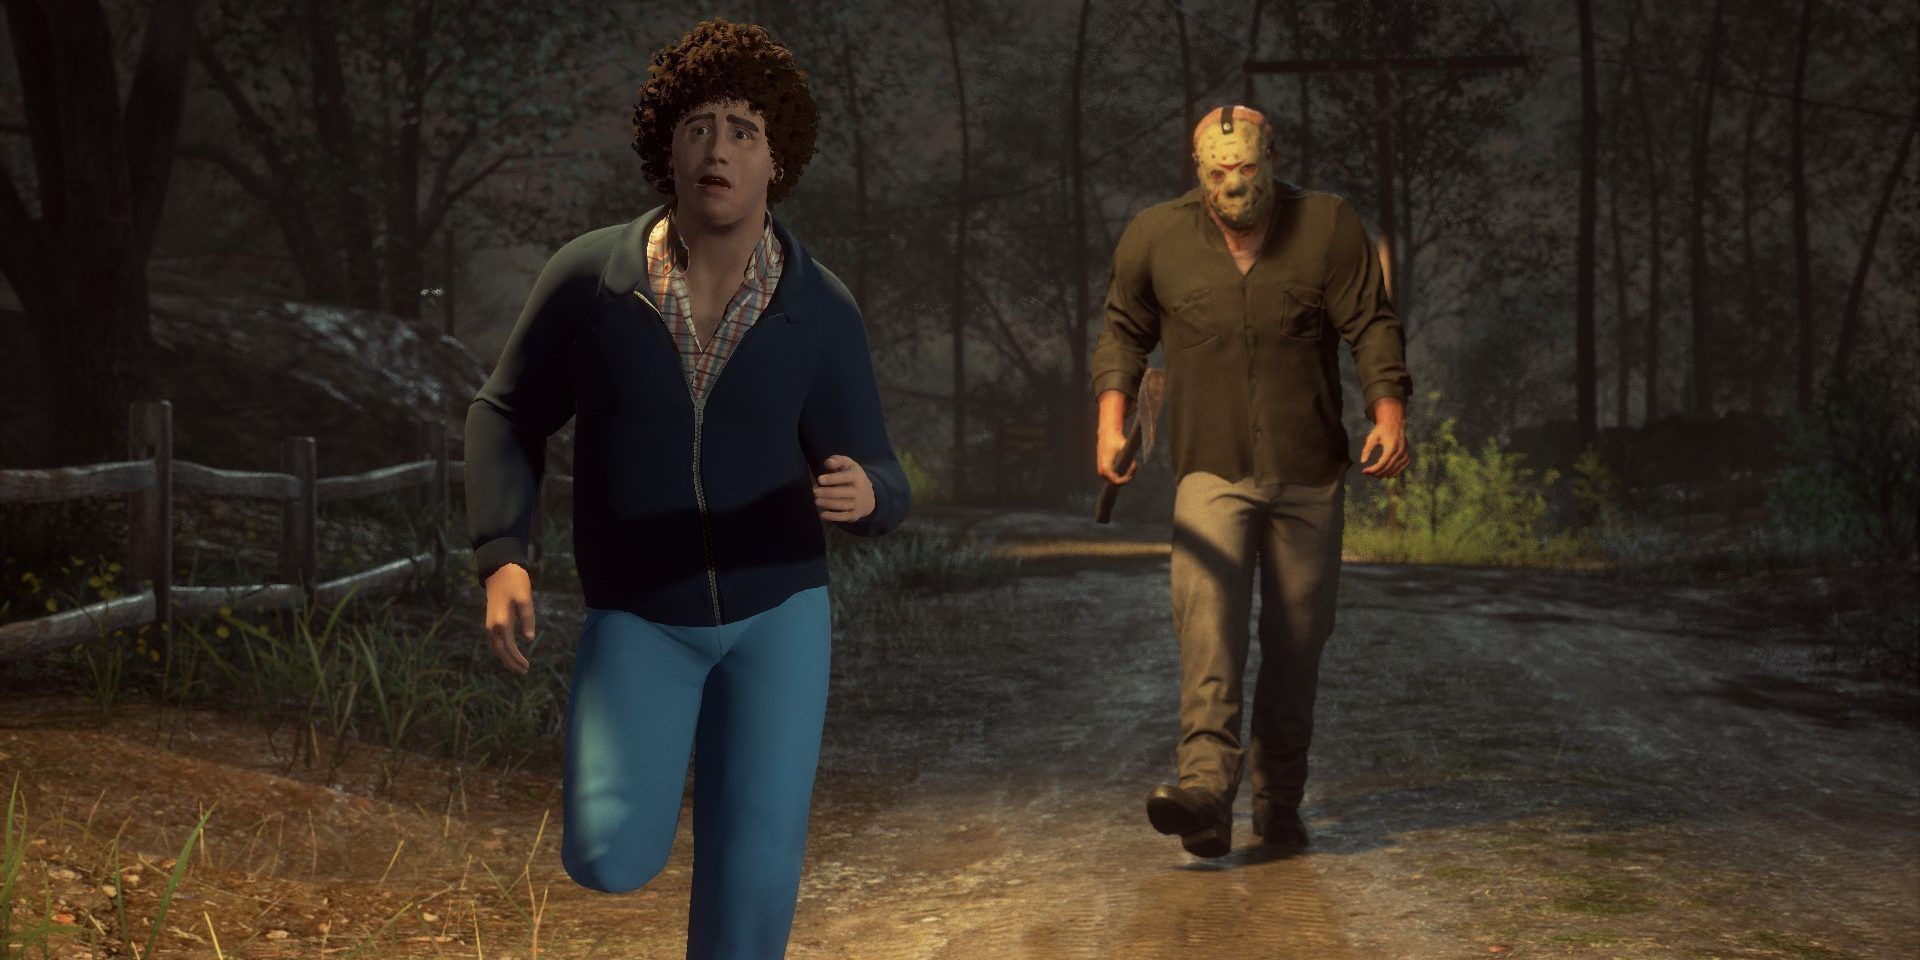 Sheldon runs away from Jason at night in Friday the 13th: The Game.